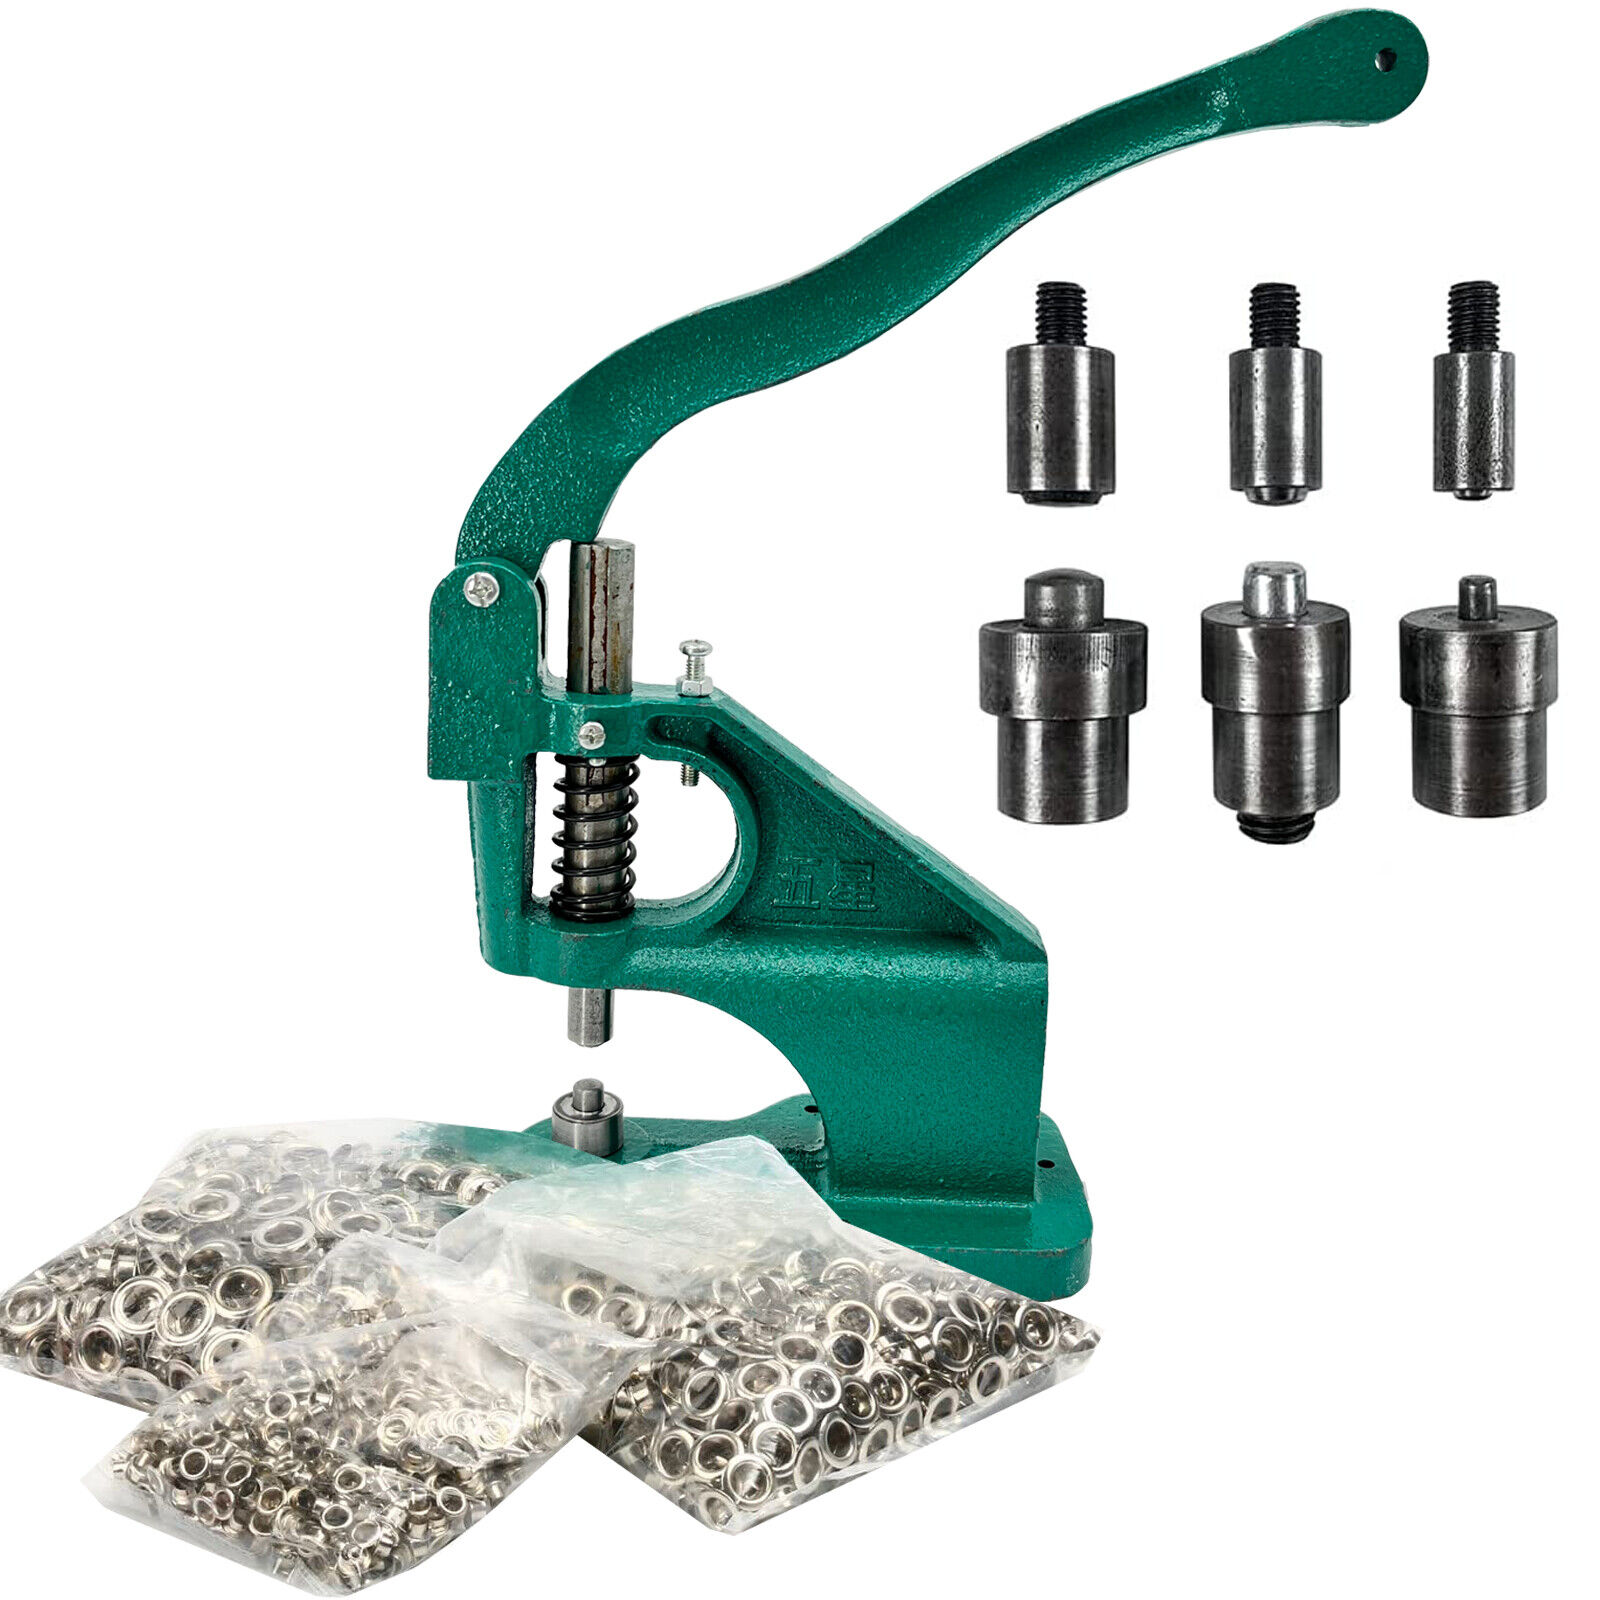 Grommet Machine Eyelet Hand Press Tool with 3 Dies and 1500 Pcs Silver Grommets